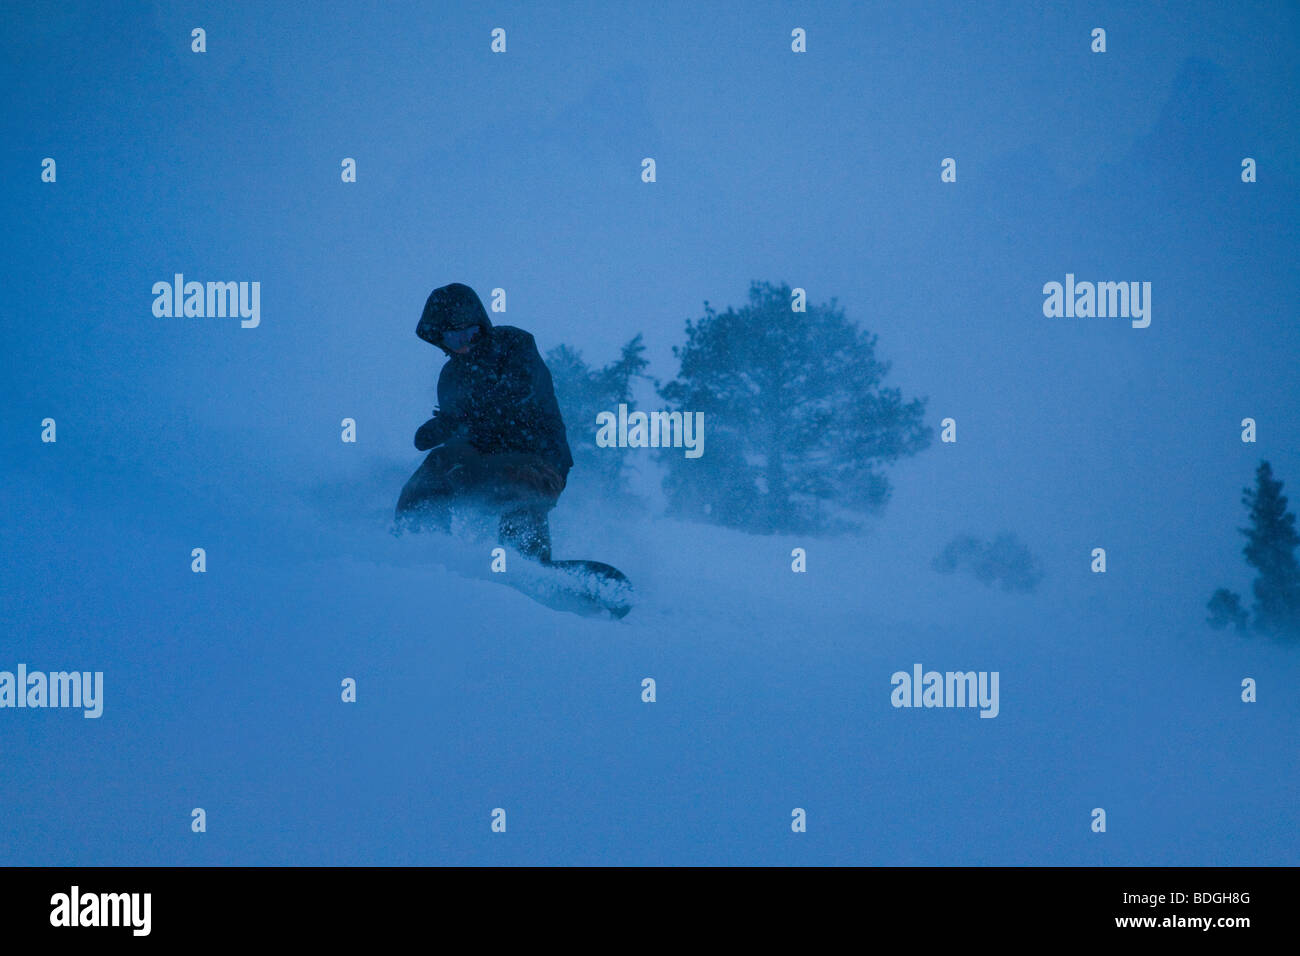 Snowboarder carving through powder snow in a dark storm. Stock Photo